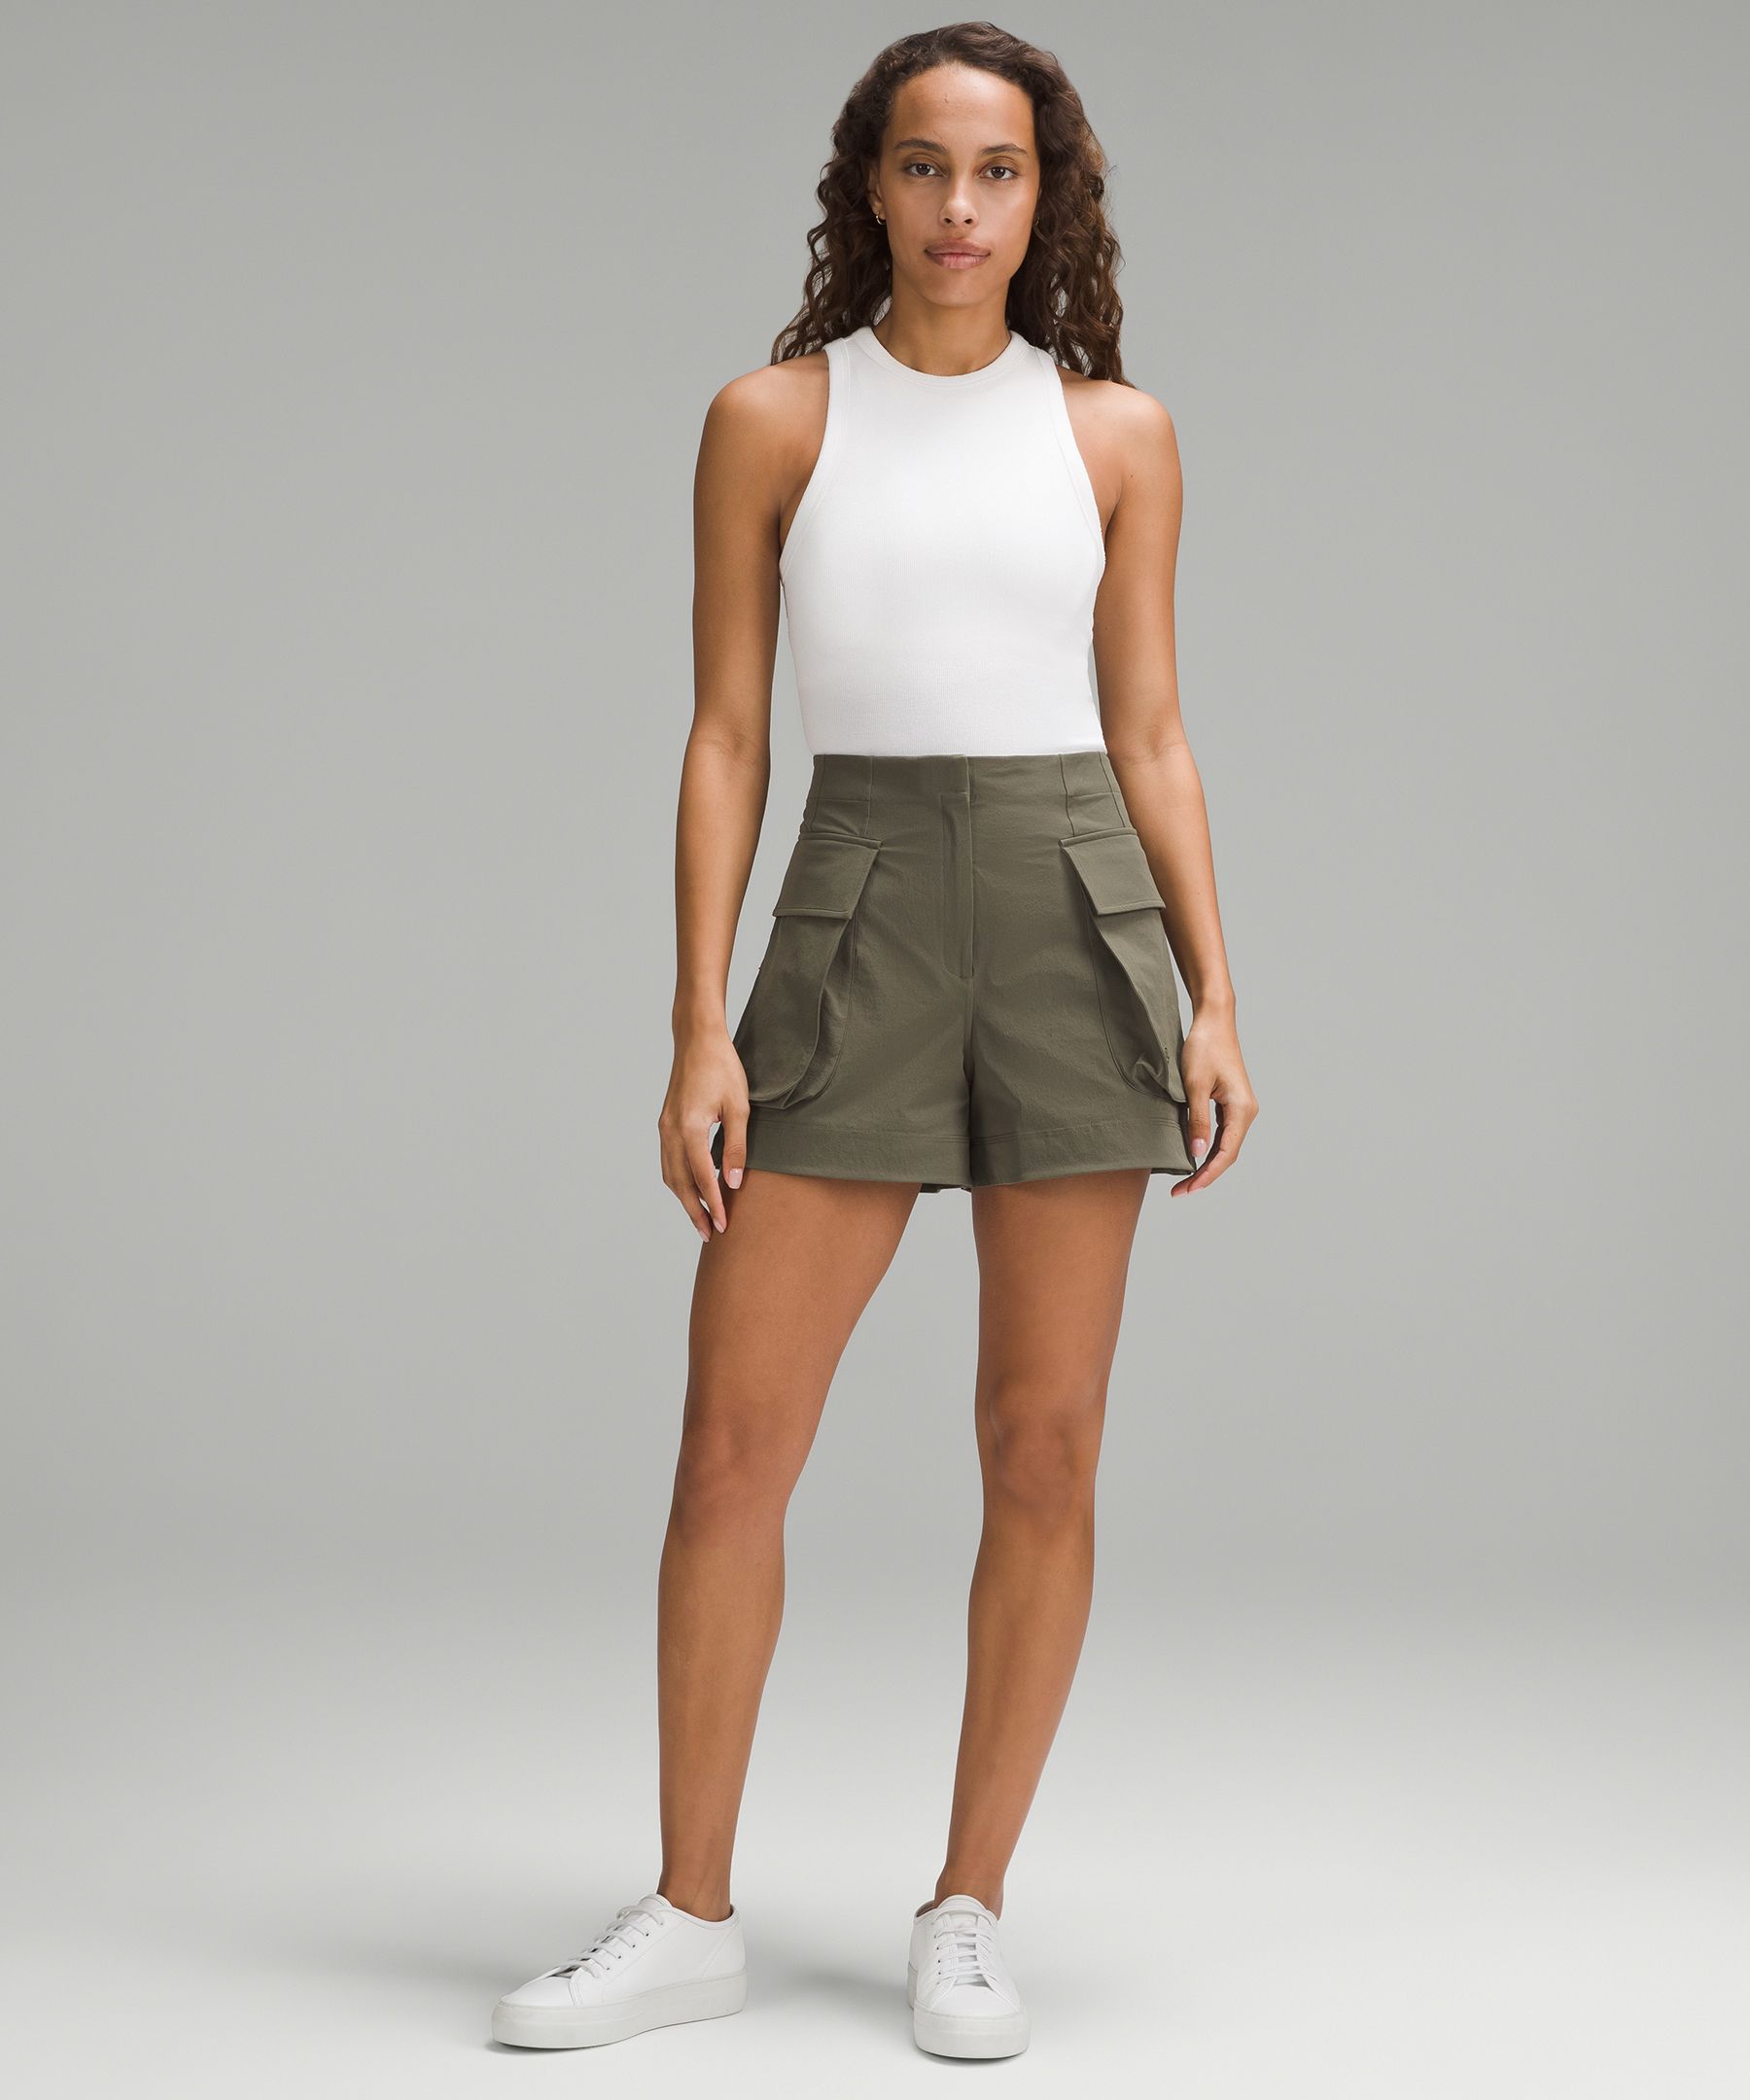 Lululemon athletica Relaxed-Fit Super-High-Rise Cargo Short 4, Women's  Shorts